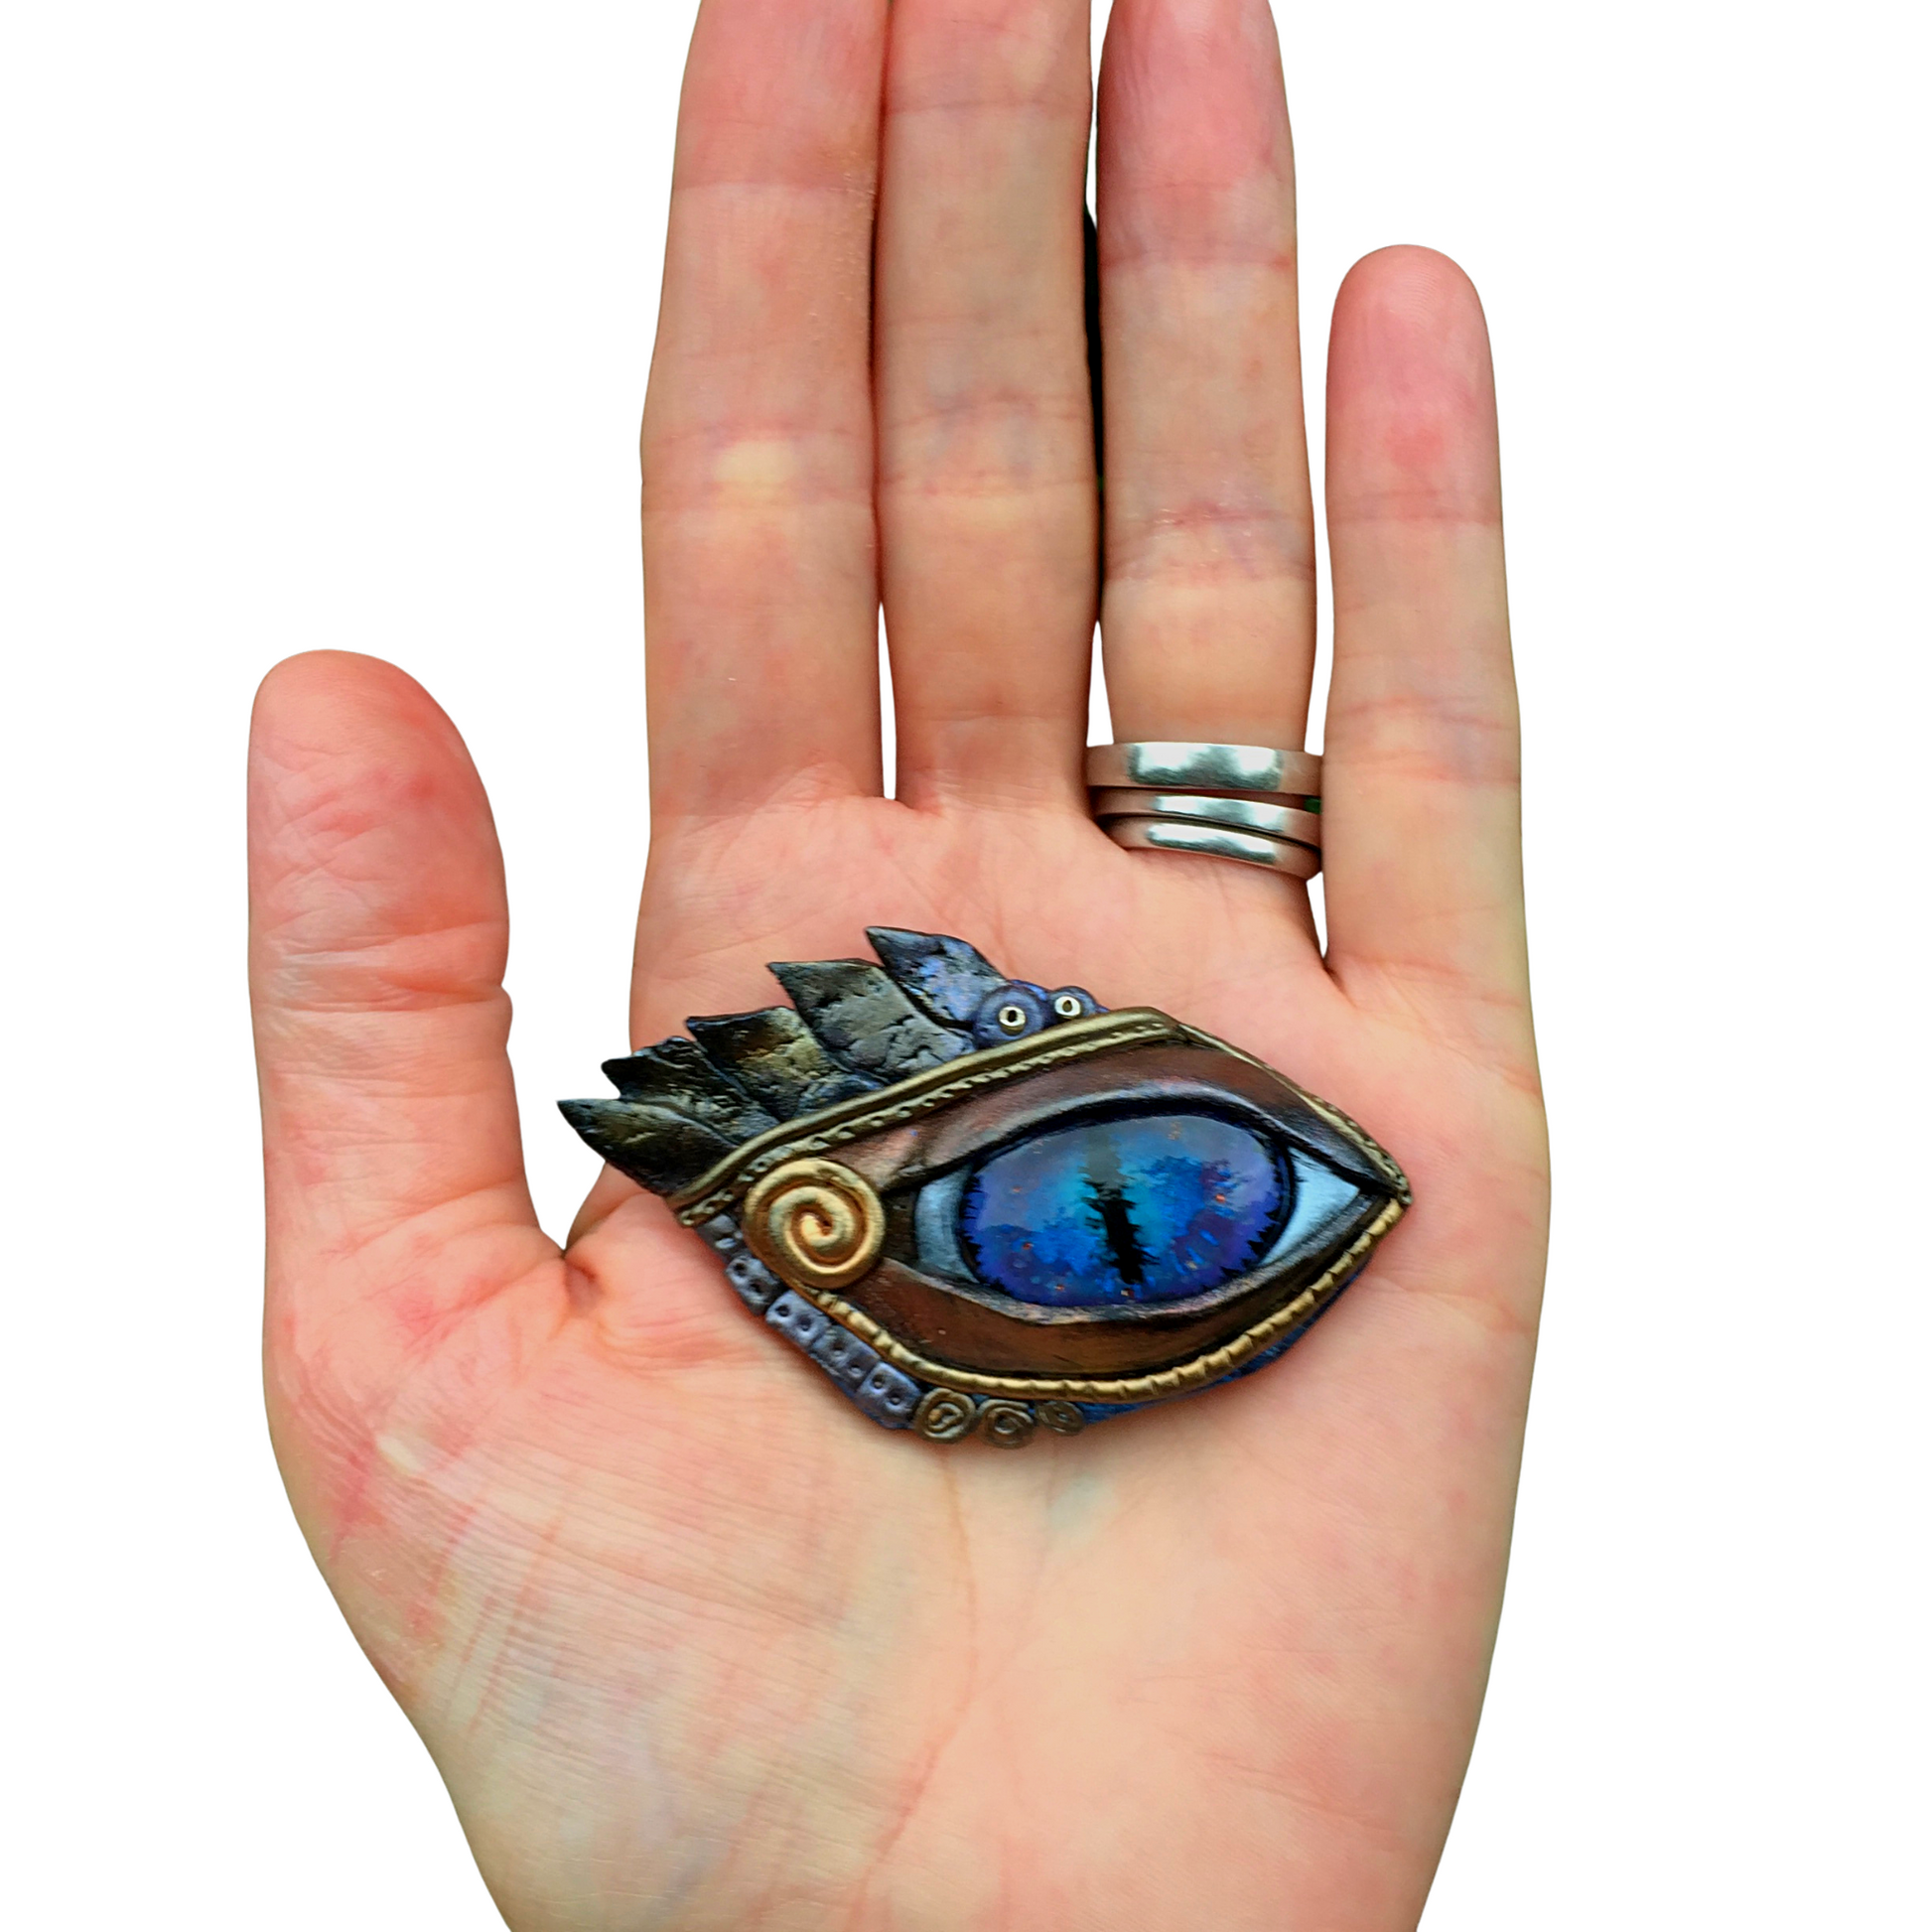 egyptian blue eye brooch with gold and bronze feather details and gold swirl at corner of the eye in a hand.